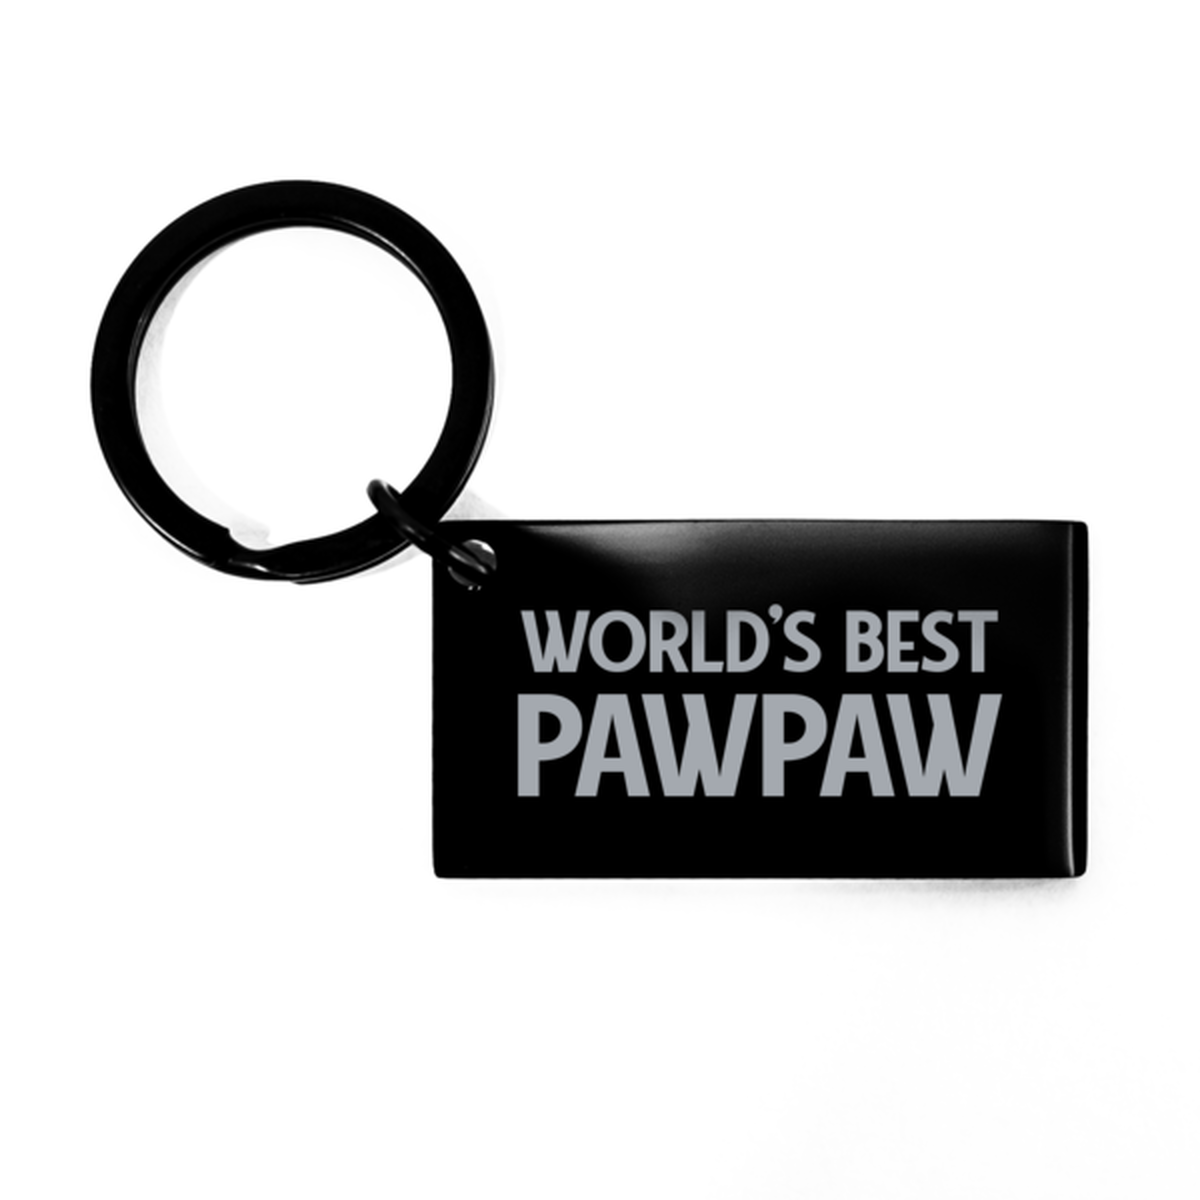 Worlds Best Pawpaw Gifts, Funny Black Engraved Keychain For Pawpaw, Birthday Presents For Men